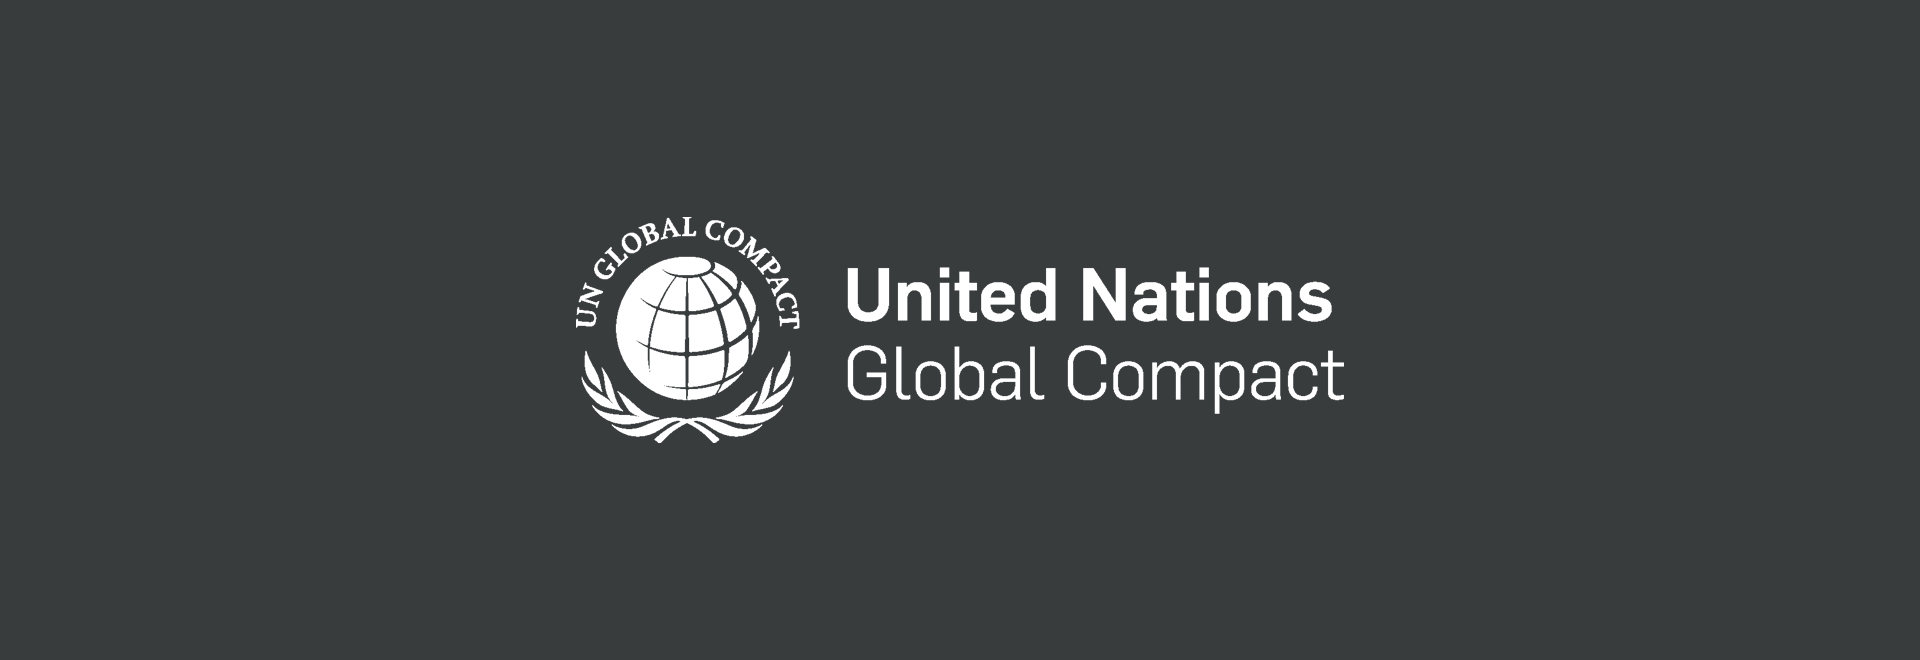 Accuro proud member of the UN Global Compact